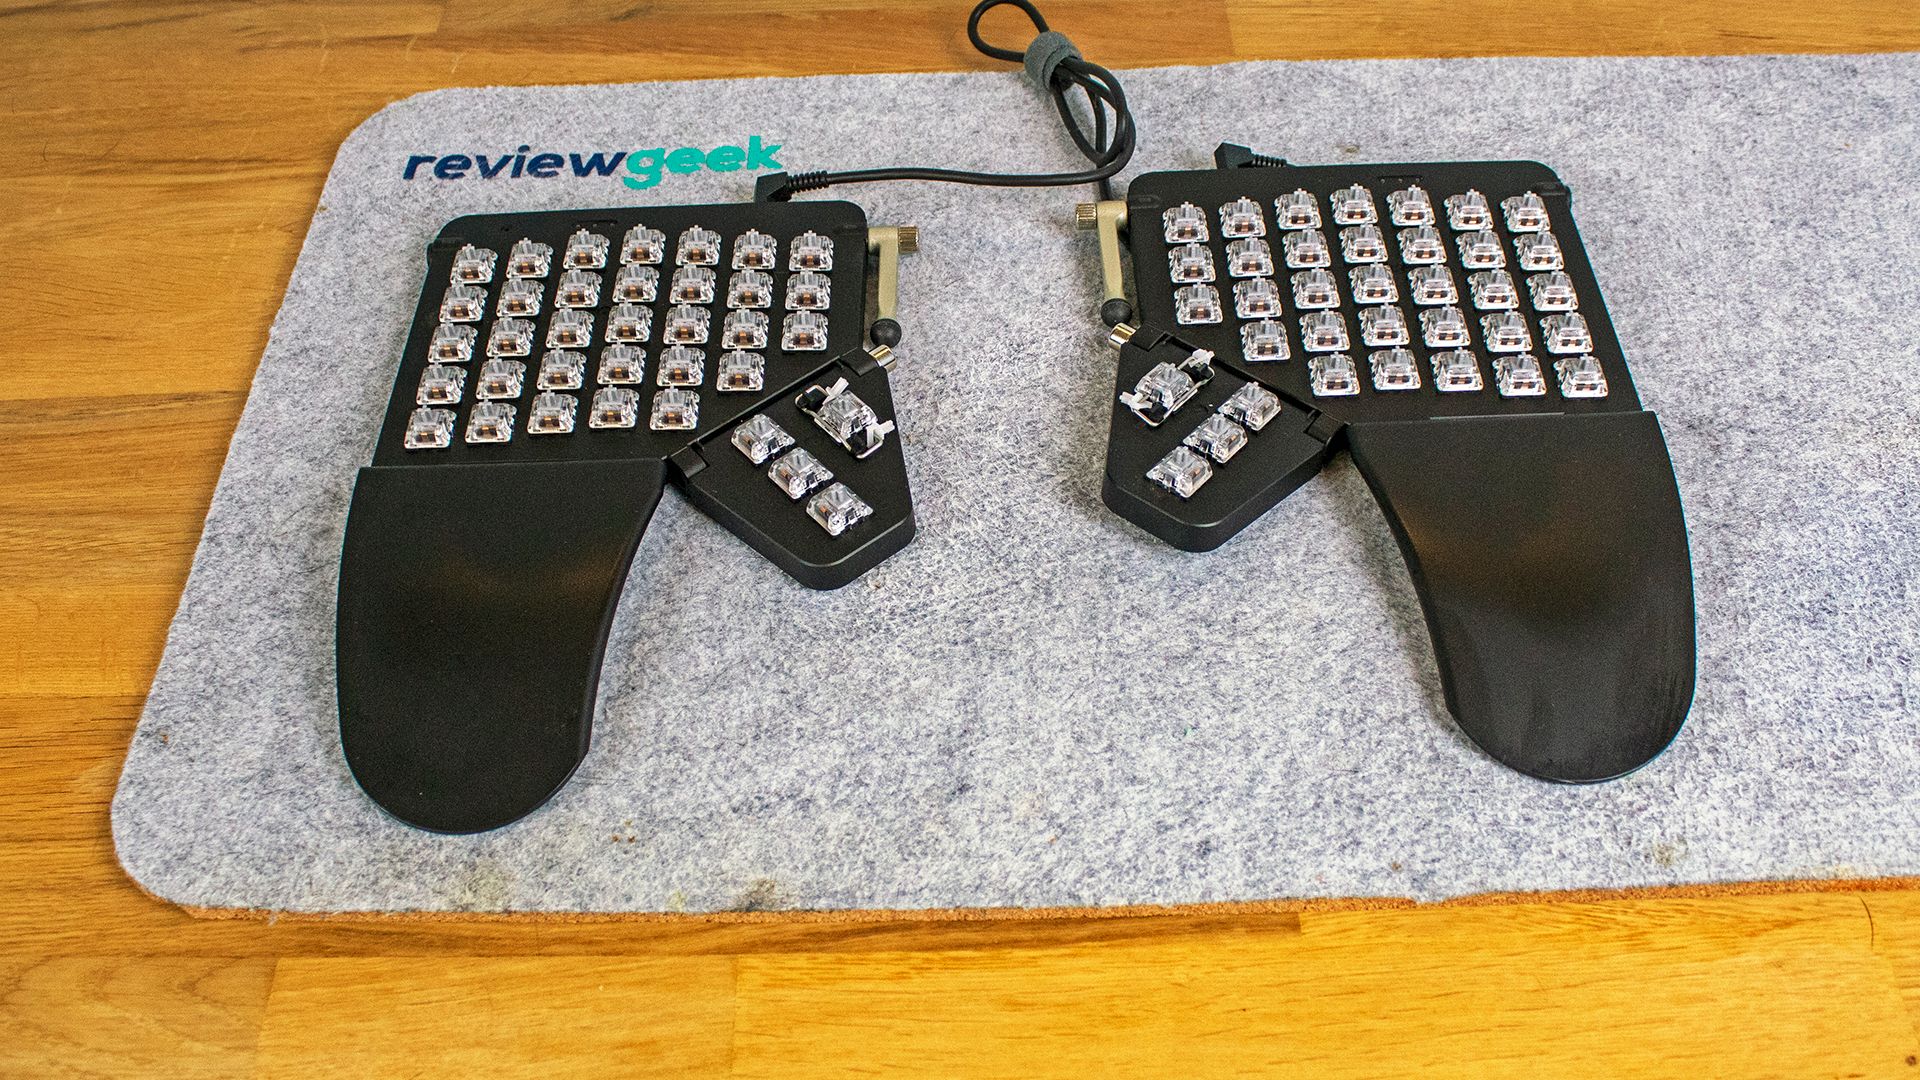 The Moonlander keyboard with every key removed